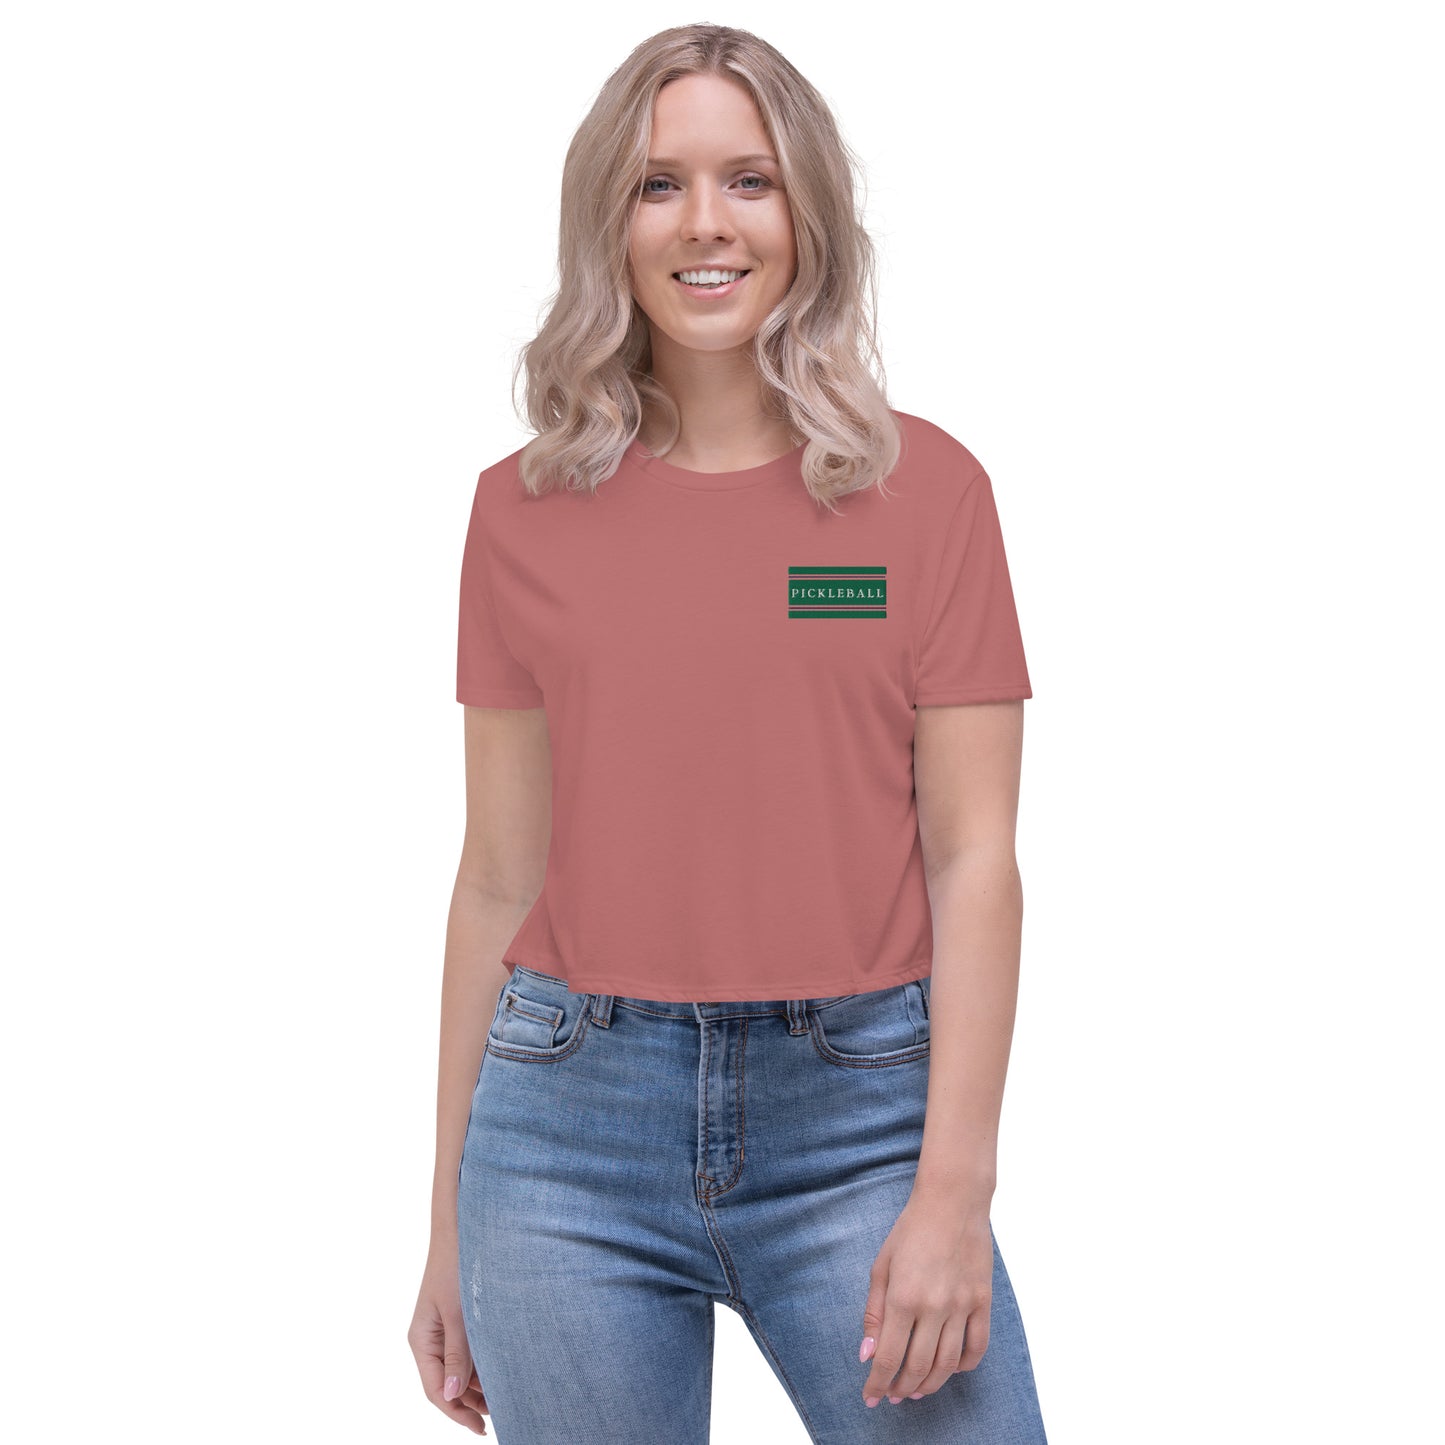 Pickleball Embroidered Crop Tee